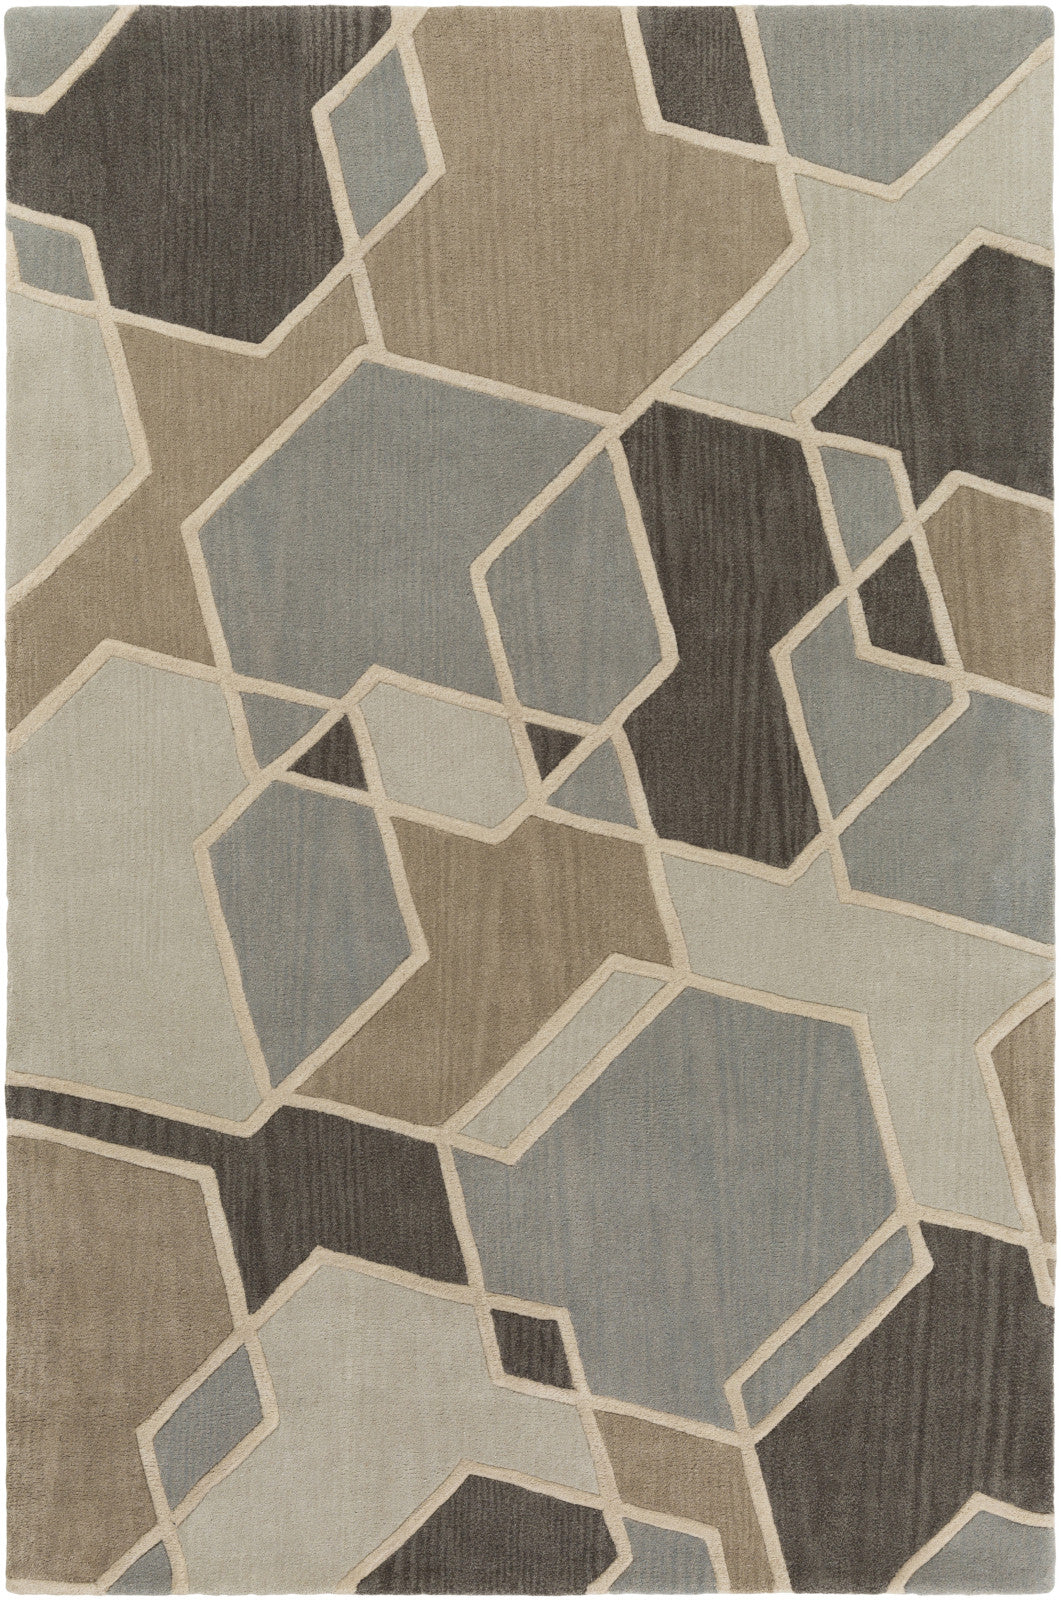 Oasis OAS-1123 Green Area Rug by Surya